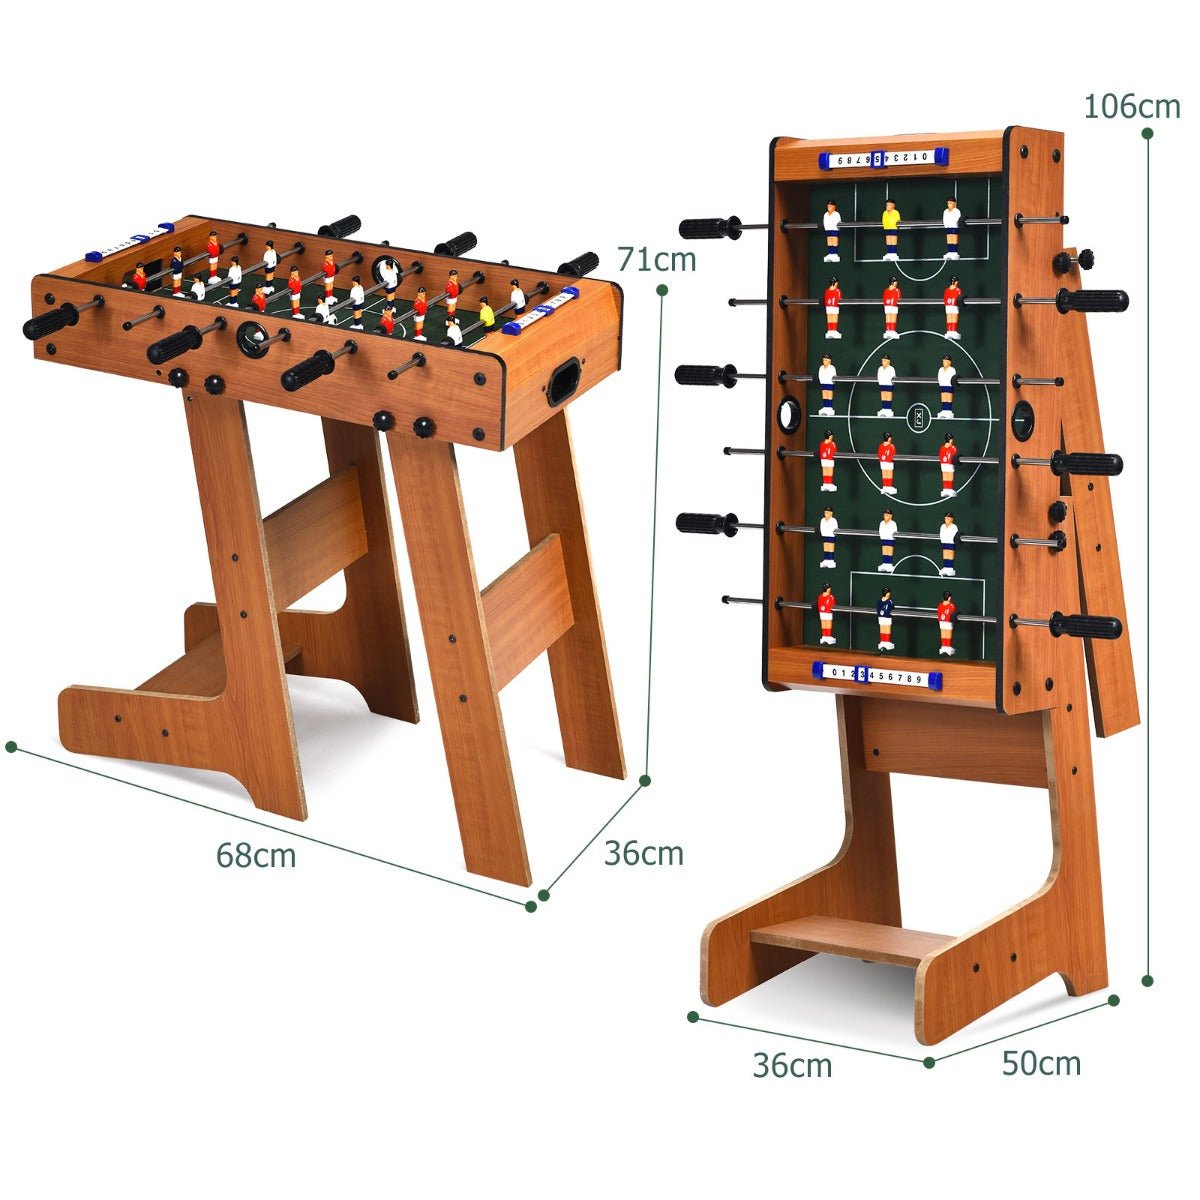 Enhance Fun with the Folding Foosball Table - Available Here